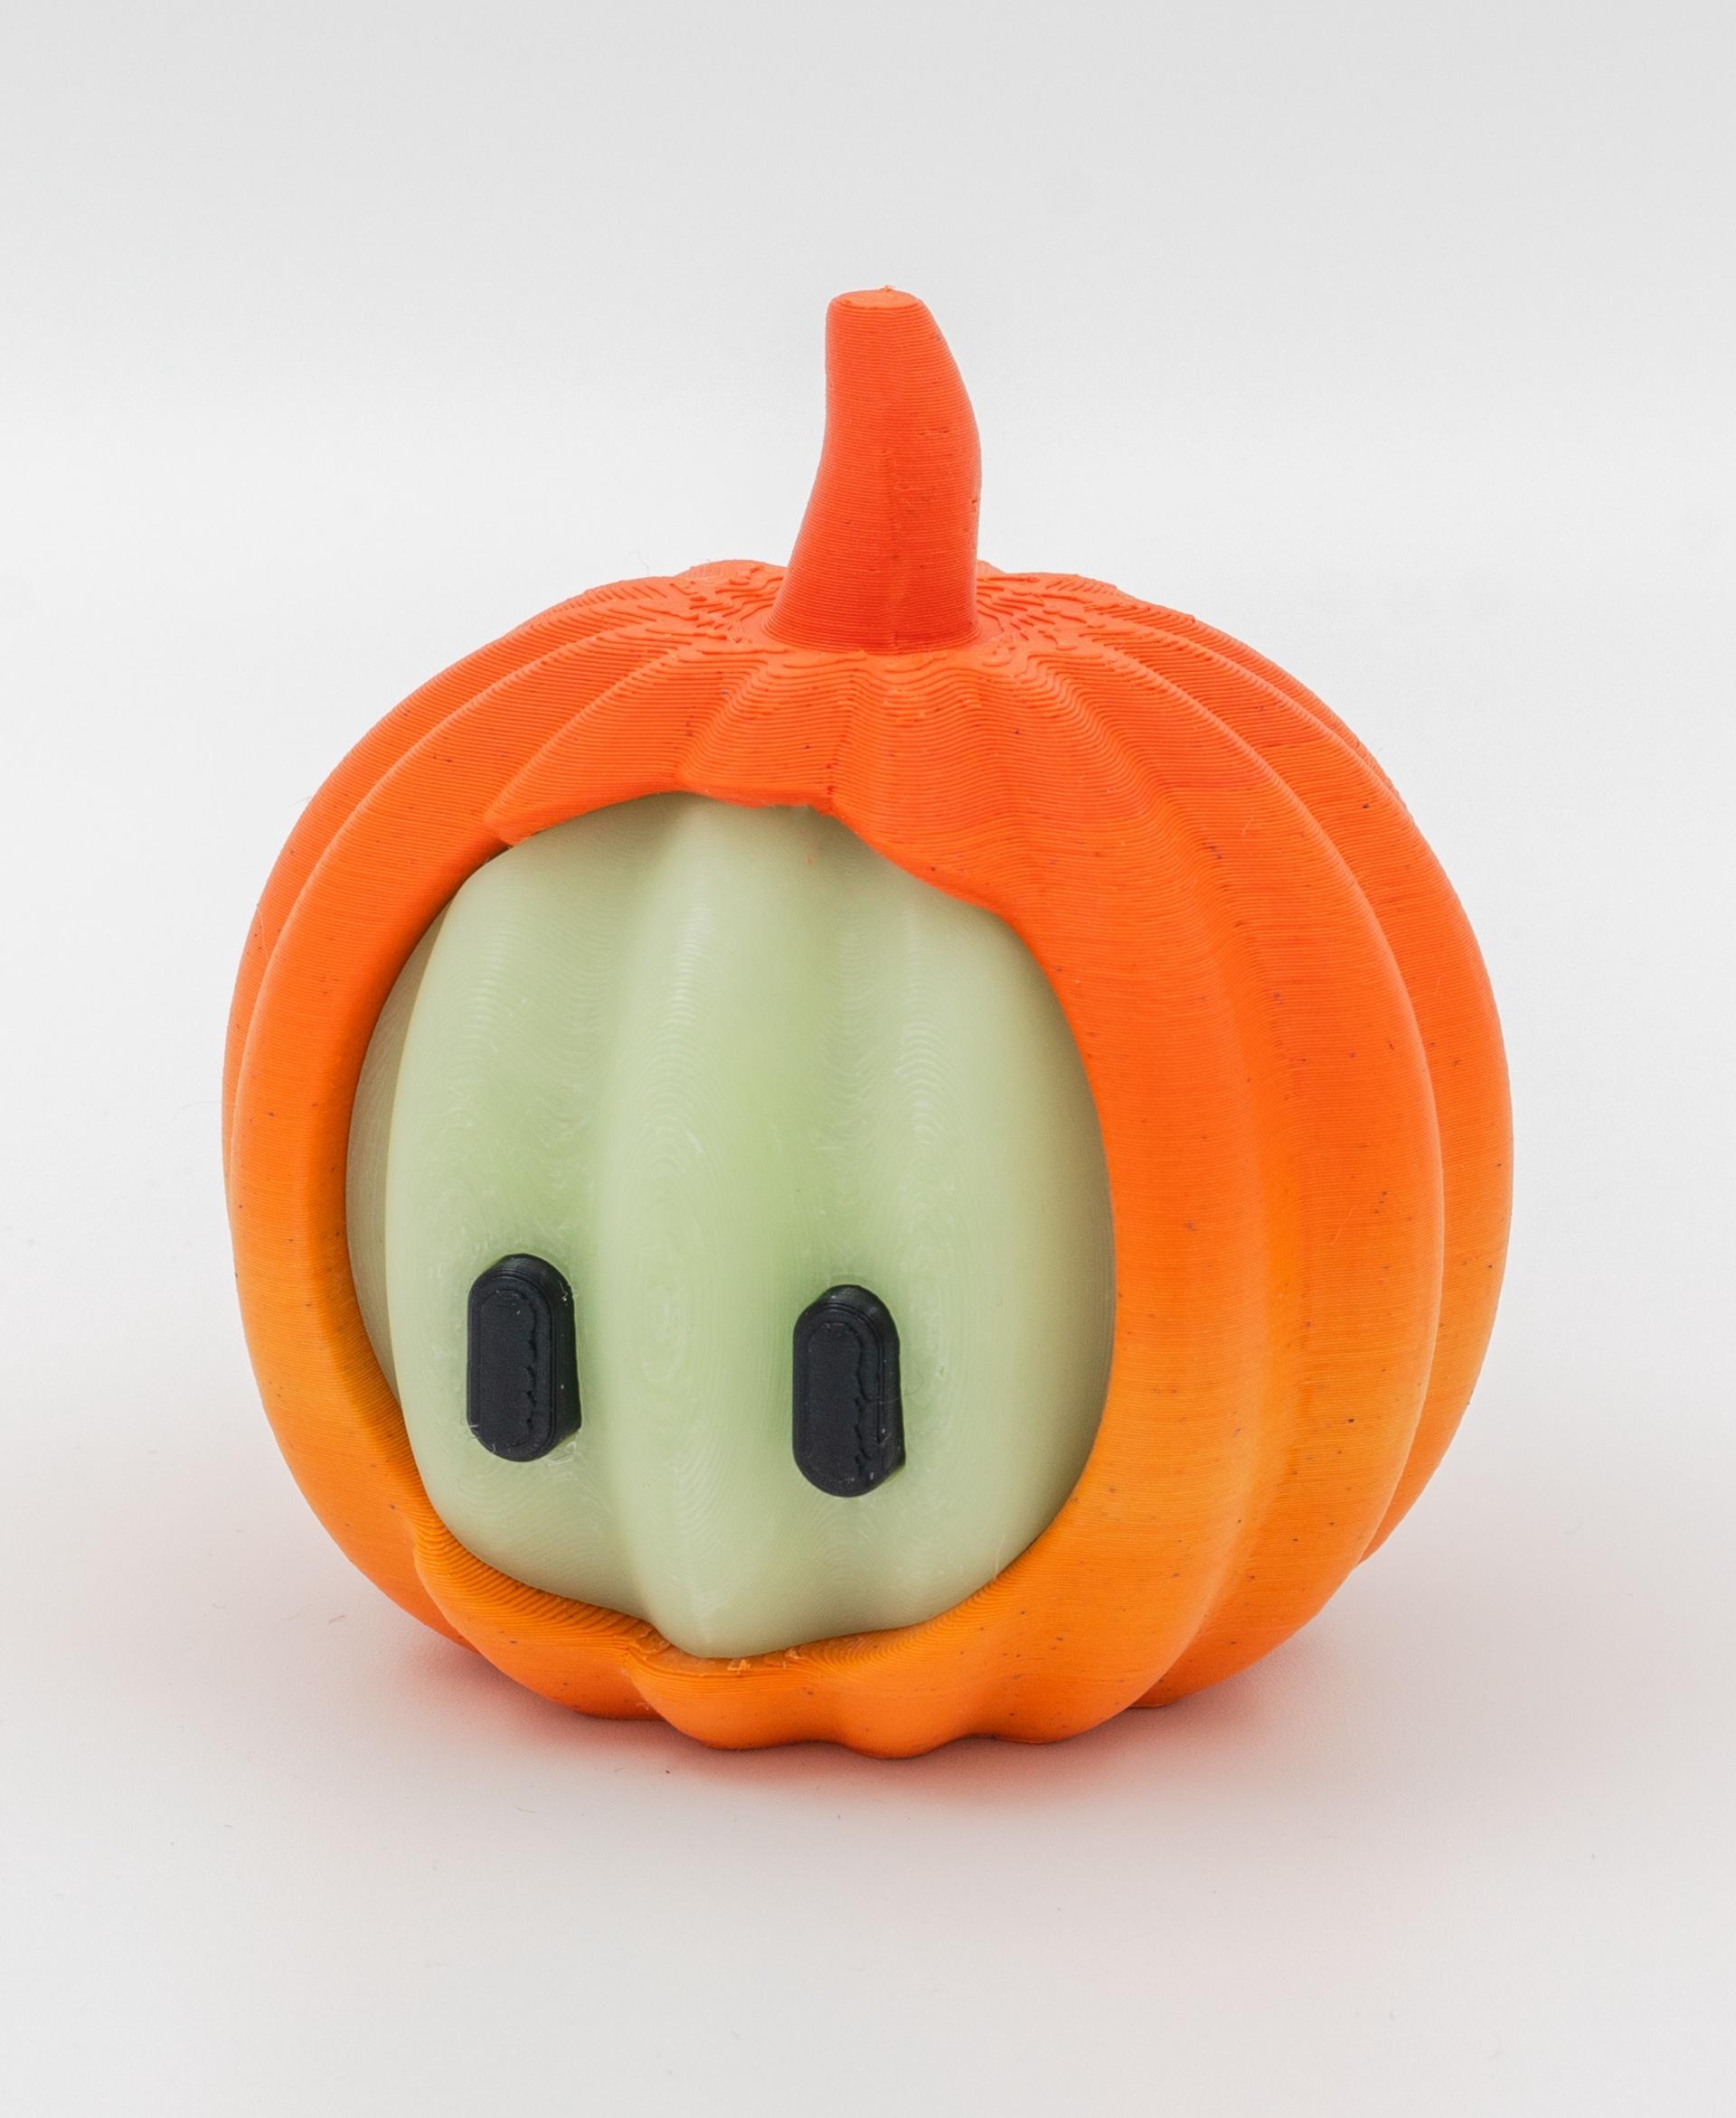 fall guys pumpkin - Printed in Polymaker Polyterra (glow ni the dark) filament and printed on Bambulab P1P and XIC
@thangs3dcontest - 3d model